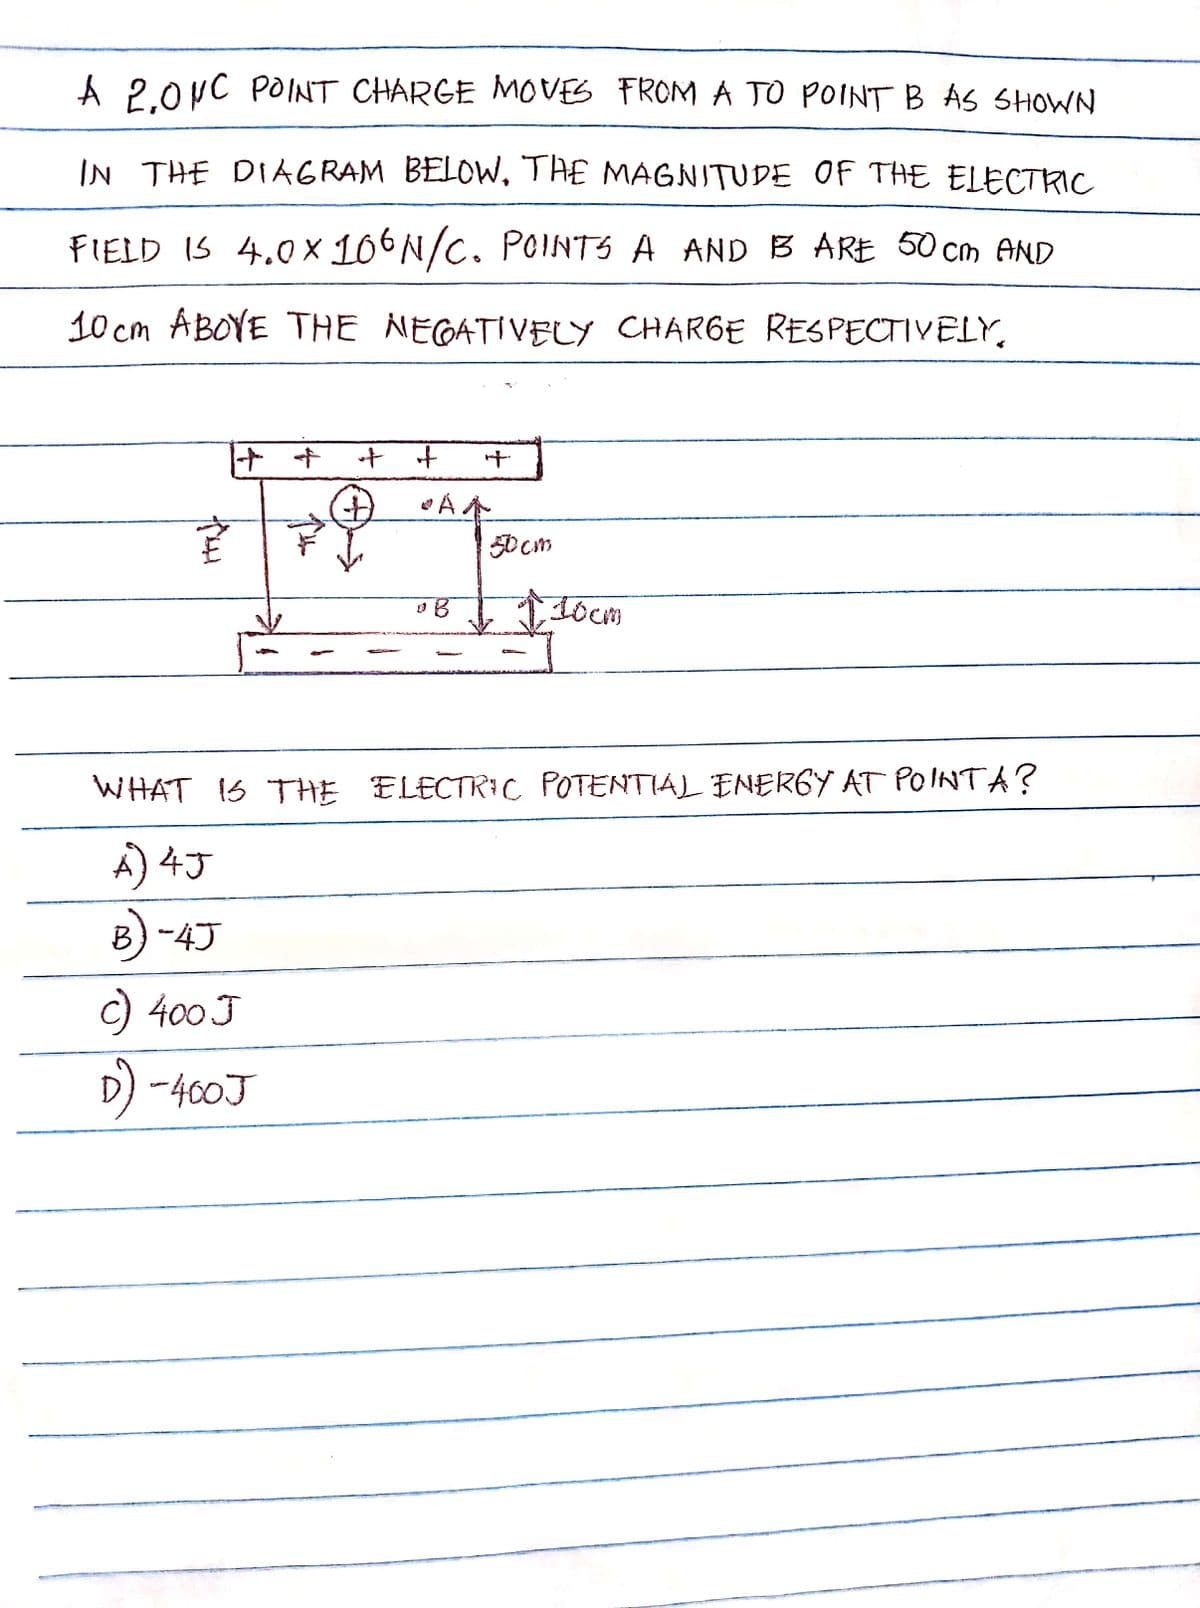 A 2.0NC POINT CHARGE MOVES FROM A TO POINT B AS SHOWN
IN THE DIAGRAM BELOW. THE MAGNITUDE OF THE ELECTRIC
FIELD IS 4.0x106N/C. POINTS A AND B ARE 50cm AND
10cm ABOVE THE NEGATIVELY CHARGE RESPECTIVELY,
fou
++
+
•AA
0 B
50 cm
10cm
WHAT IS THE ELECTRIC POTENTIAL ENERGY AT POINTA?
A) 4J
B)-4J
c) 400 J
D) -400J